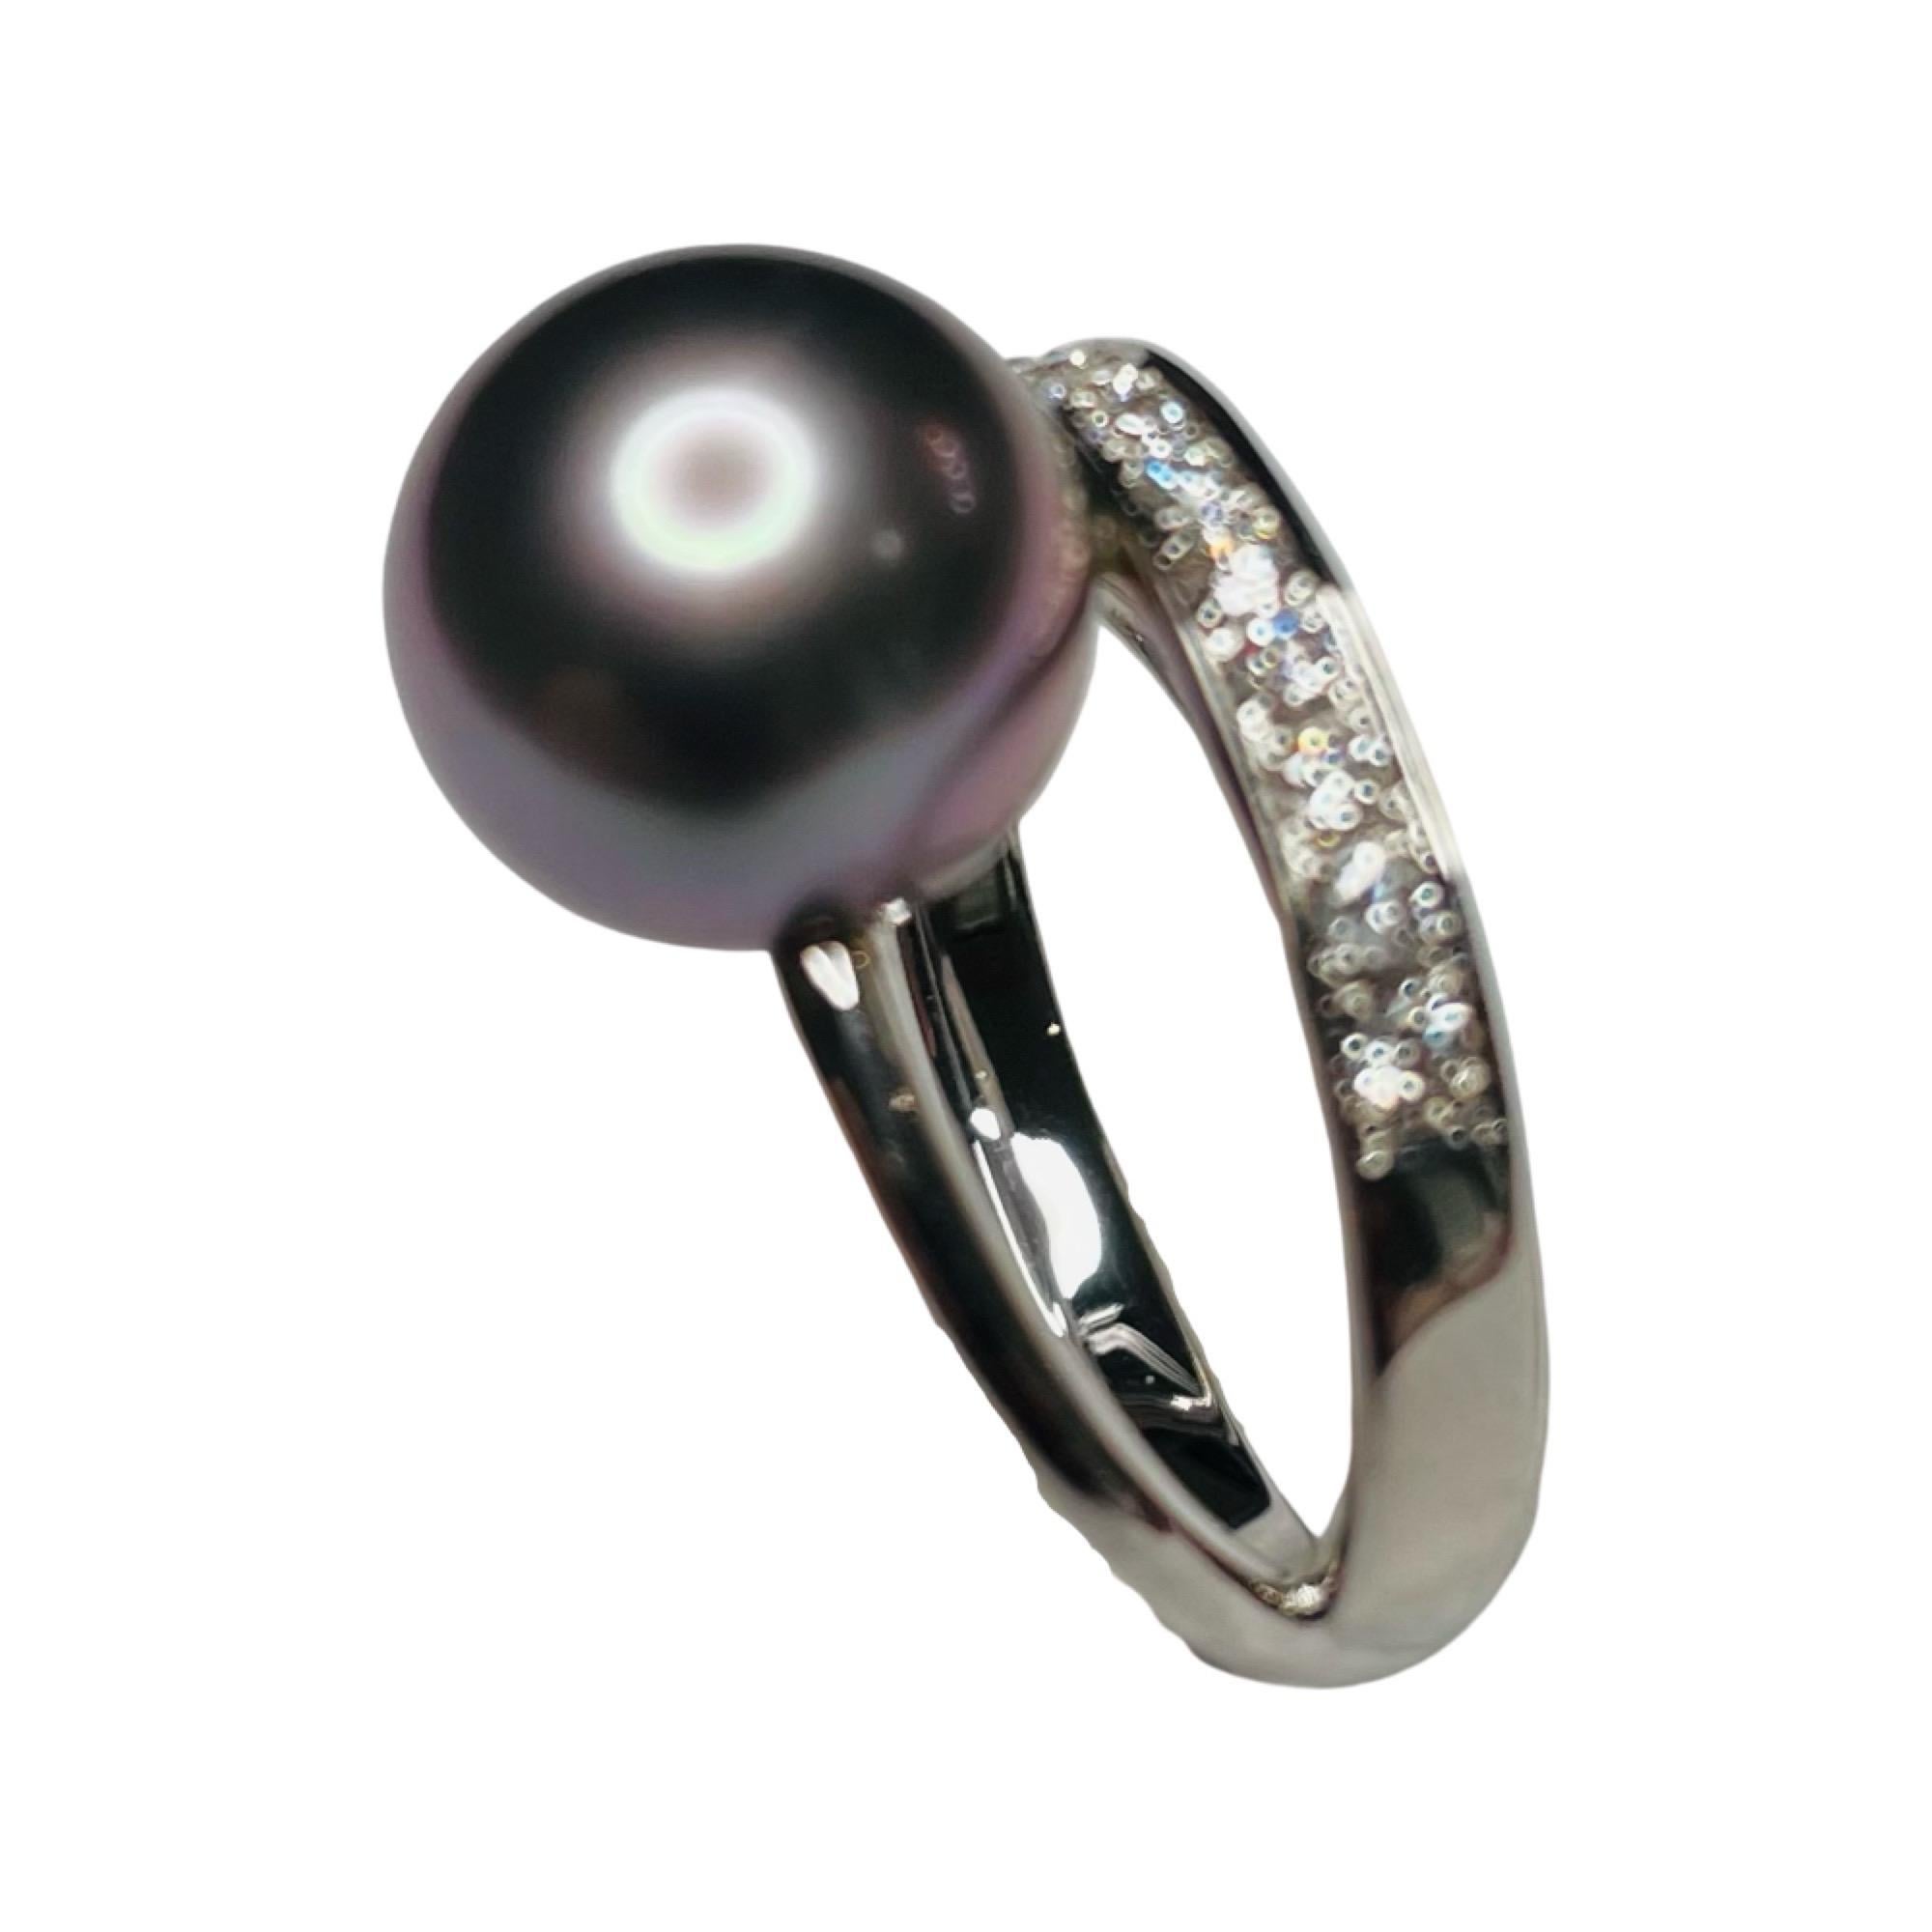 Contemporary Gellner 18K White Gold Tahitian Black Pearl and Diamond Ring For Sale